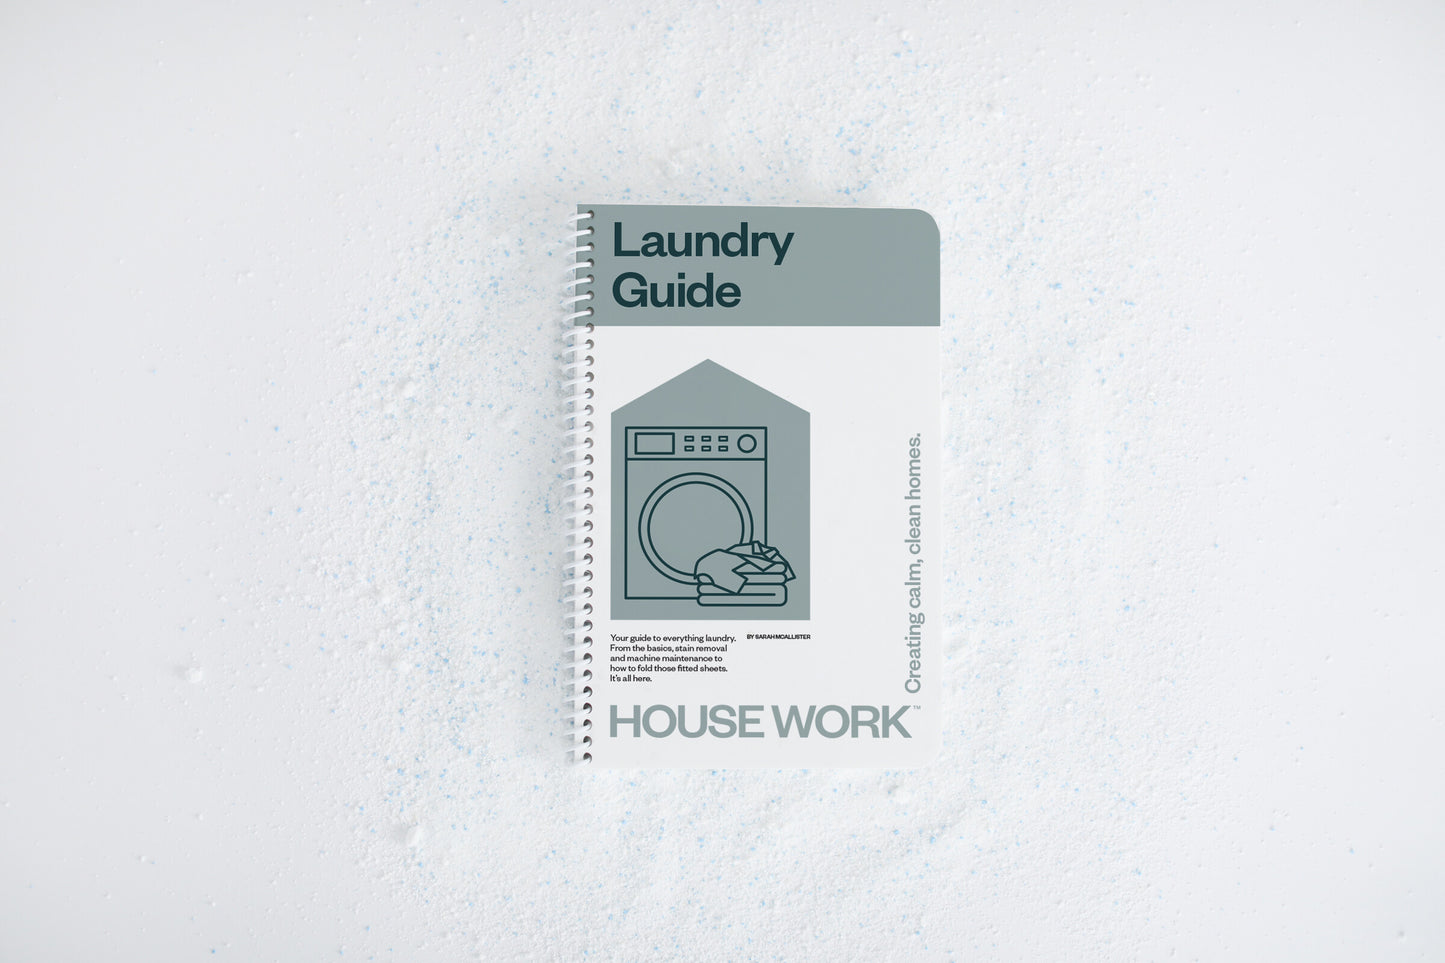 Laundry Guide (Hard Copy)